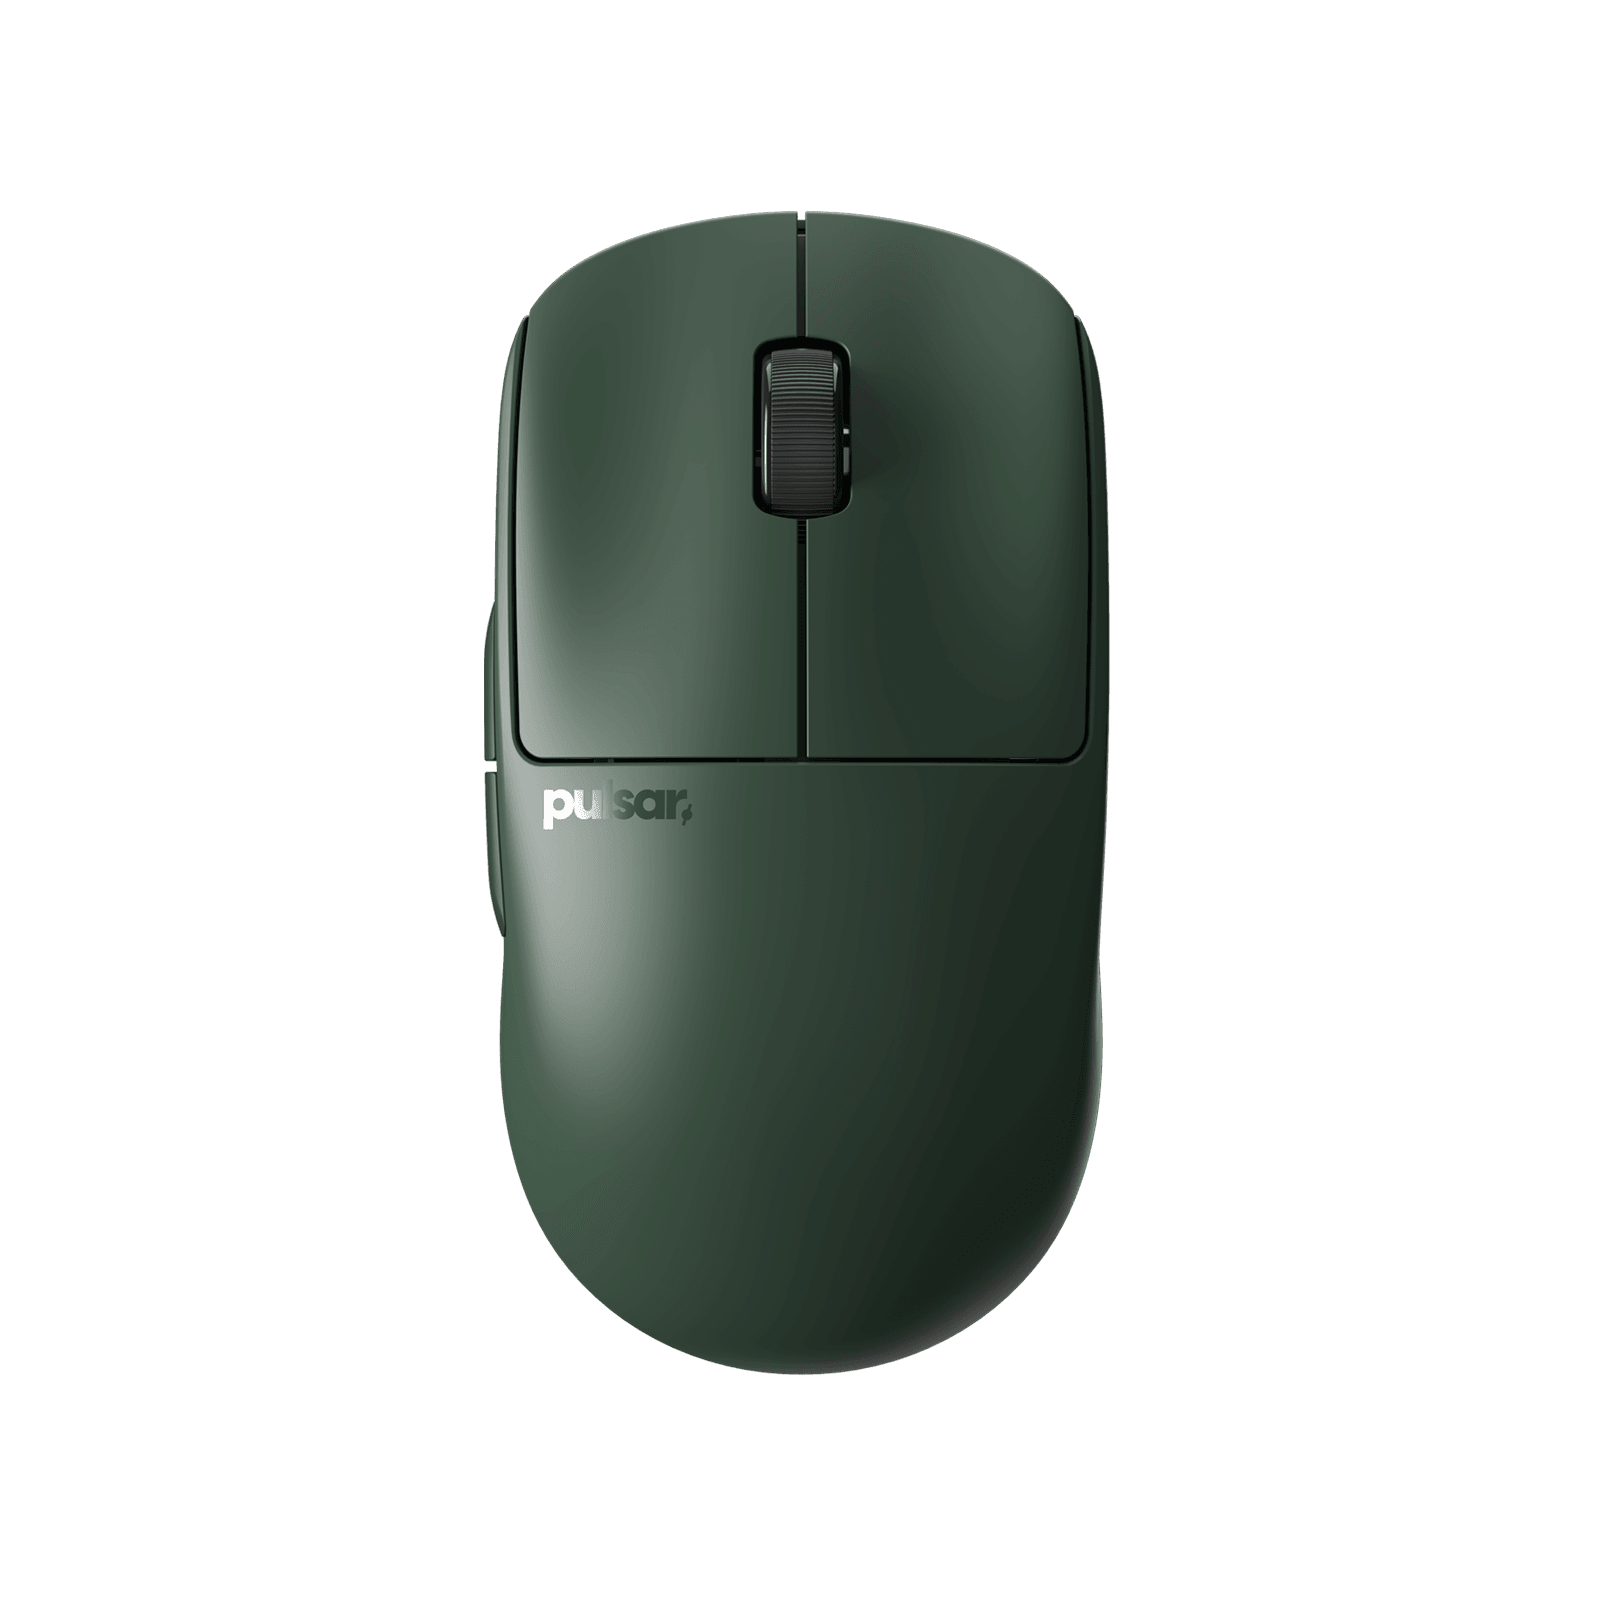 Founder's Edition] X2V2 Gaming Mouse – Pulsar Gaming Gears